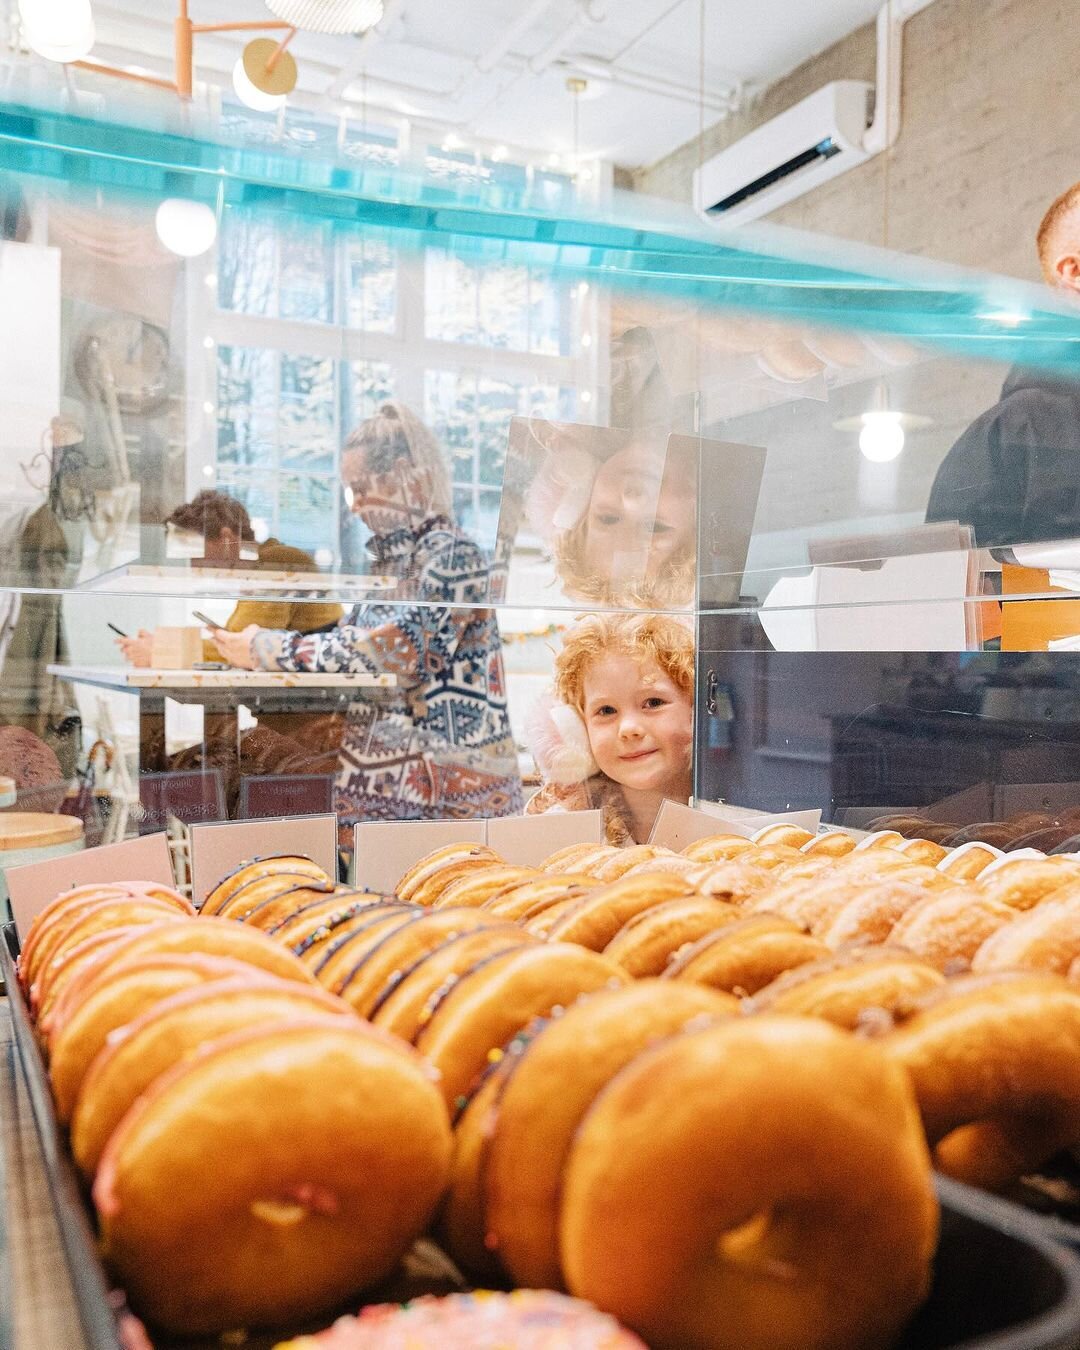 I spy with my little eye, a donut lover. 👀🍩 ⁠
⁠
Which flavour is the best? Help us decide. 👇⁠
⁠
📸: @creampony⁠
⁠.⁠
.⁠
.⁠
.⁠
#northvan #lonsdalequay #shipyardsdistrict #lowerlonsdale #vancouverbc#northvancouver #vancouvercanada #vancouverisawesome